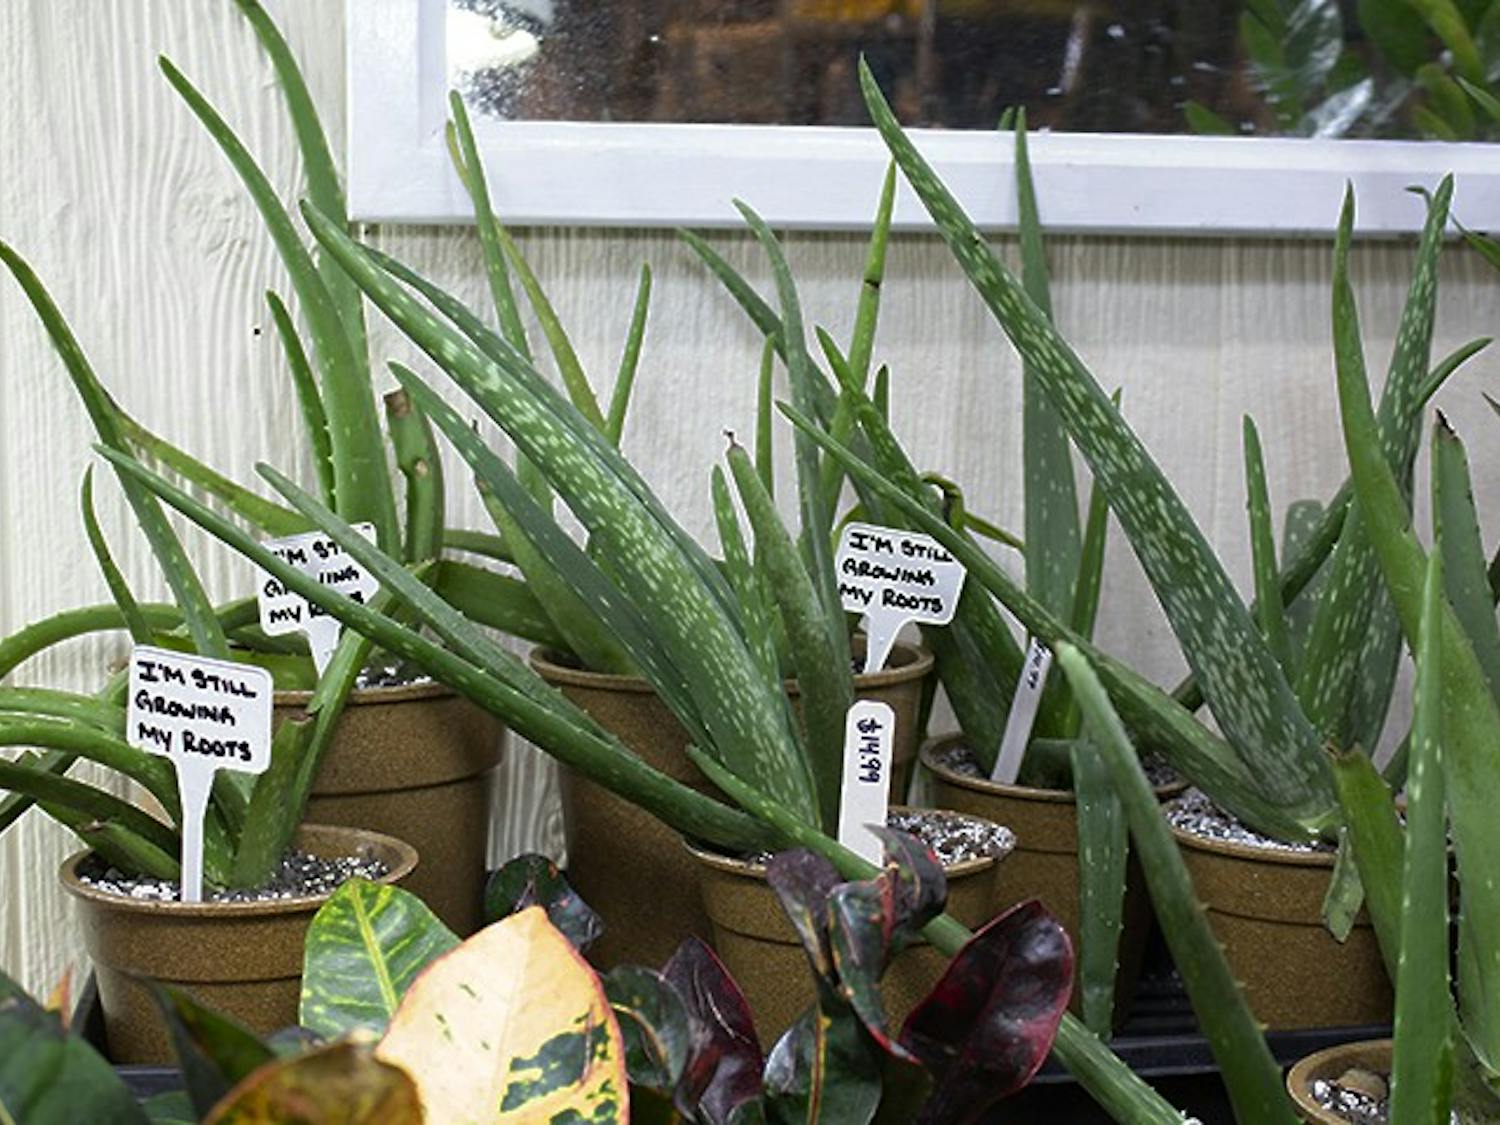 ALOE VERA- A special type of succulent is Aloe vera. This type of plant provides a gel that you can extract and use at home the same way you would use a store-bought bottle. Since these are a type of succulent, they don’t require a lot of water. These guys can be watered as little as every three weeks. These are perfect for students with schedules that don’t allow for a lot of time to water plants.